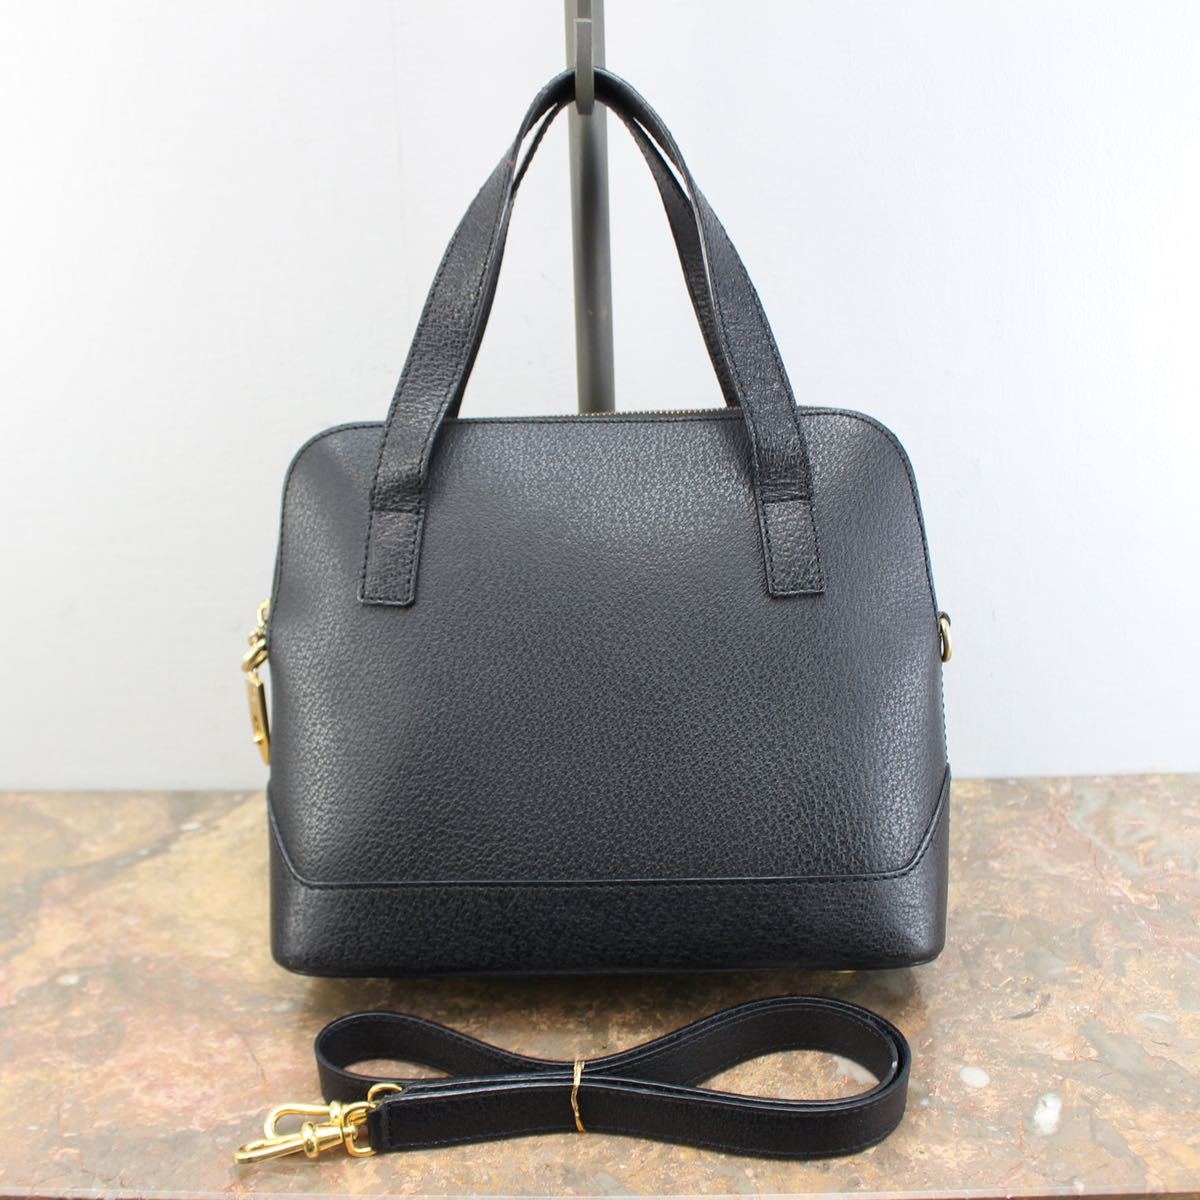 CELINE 2WAY LEATHER SHOULDER BAG MADE IN ITALY/セリーヌ2wayレザーショルダーバッグ